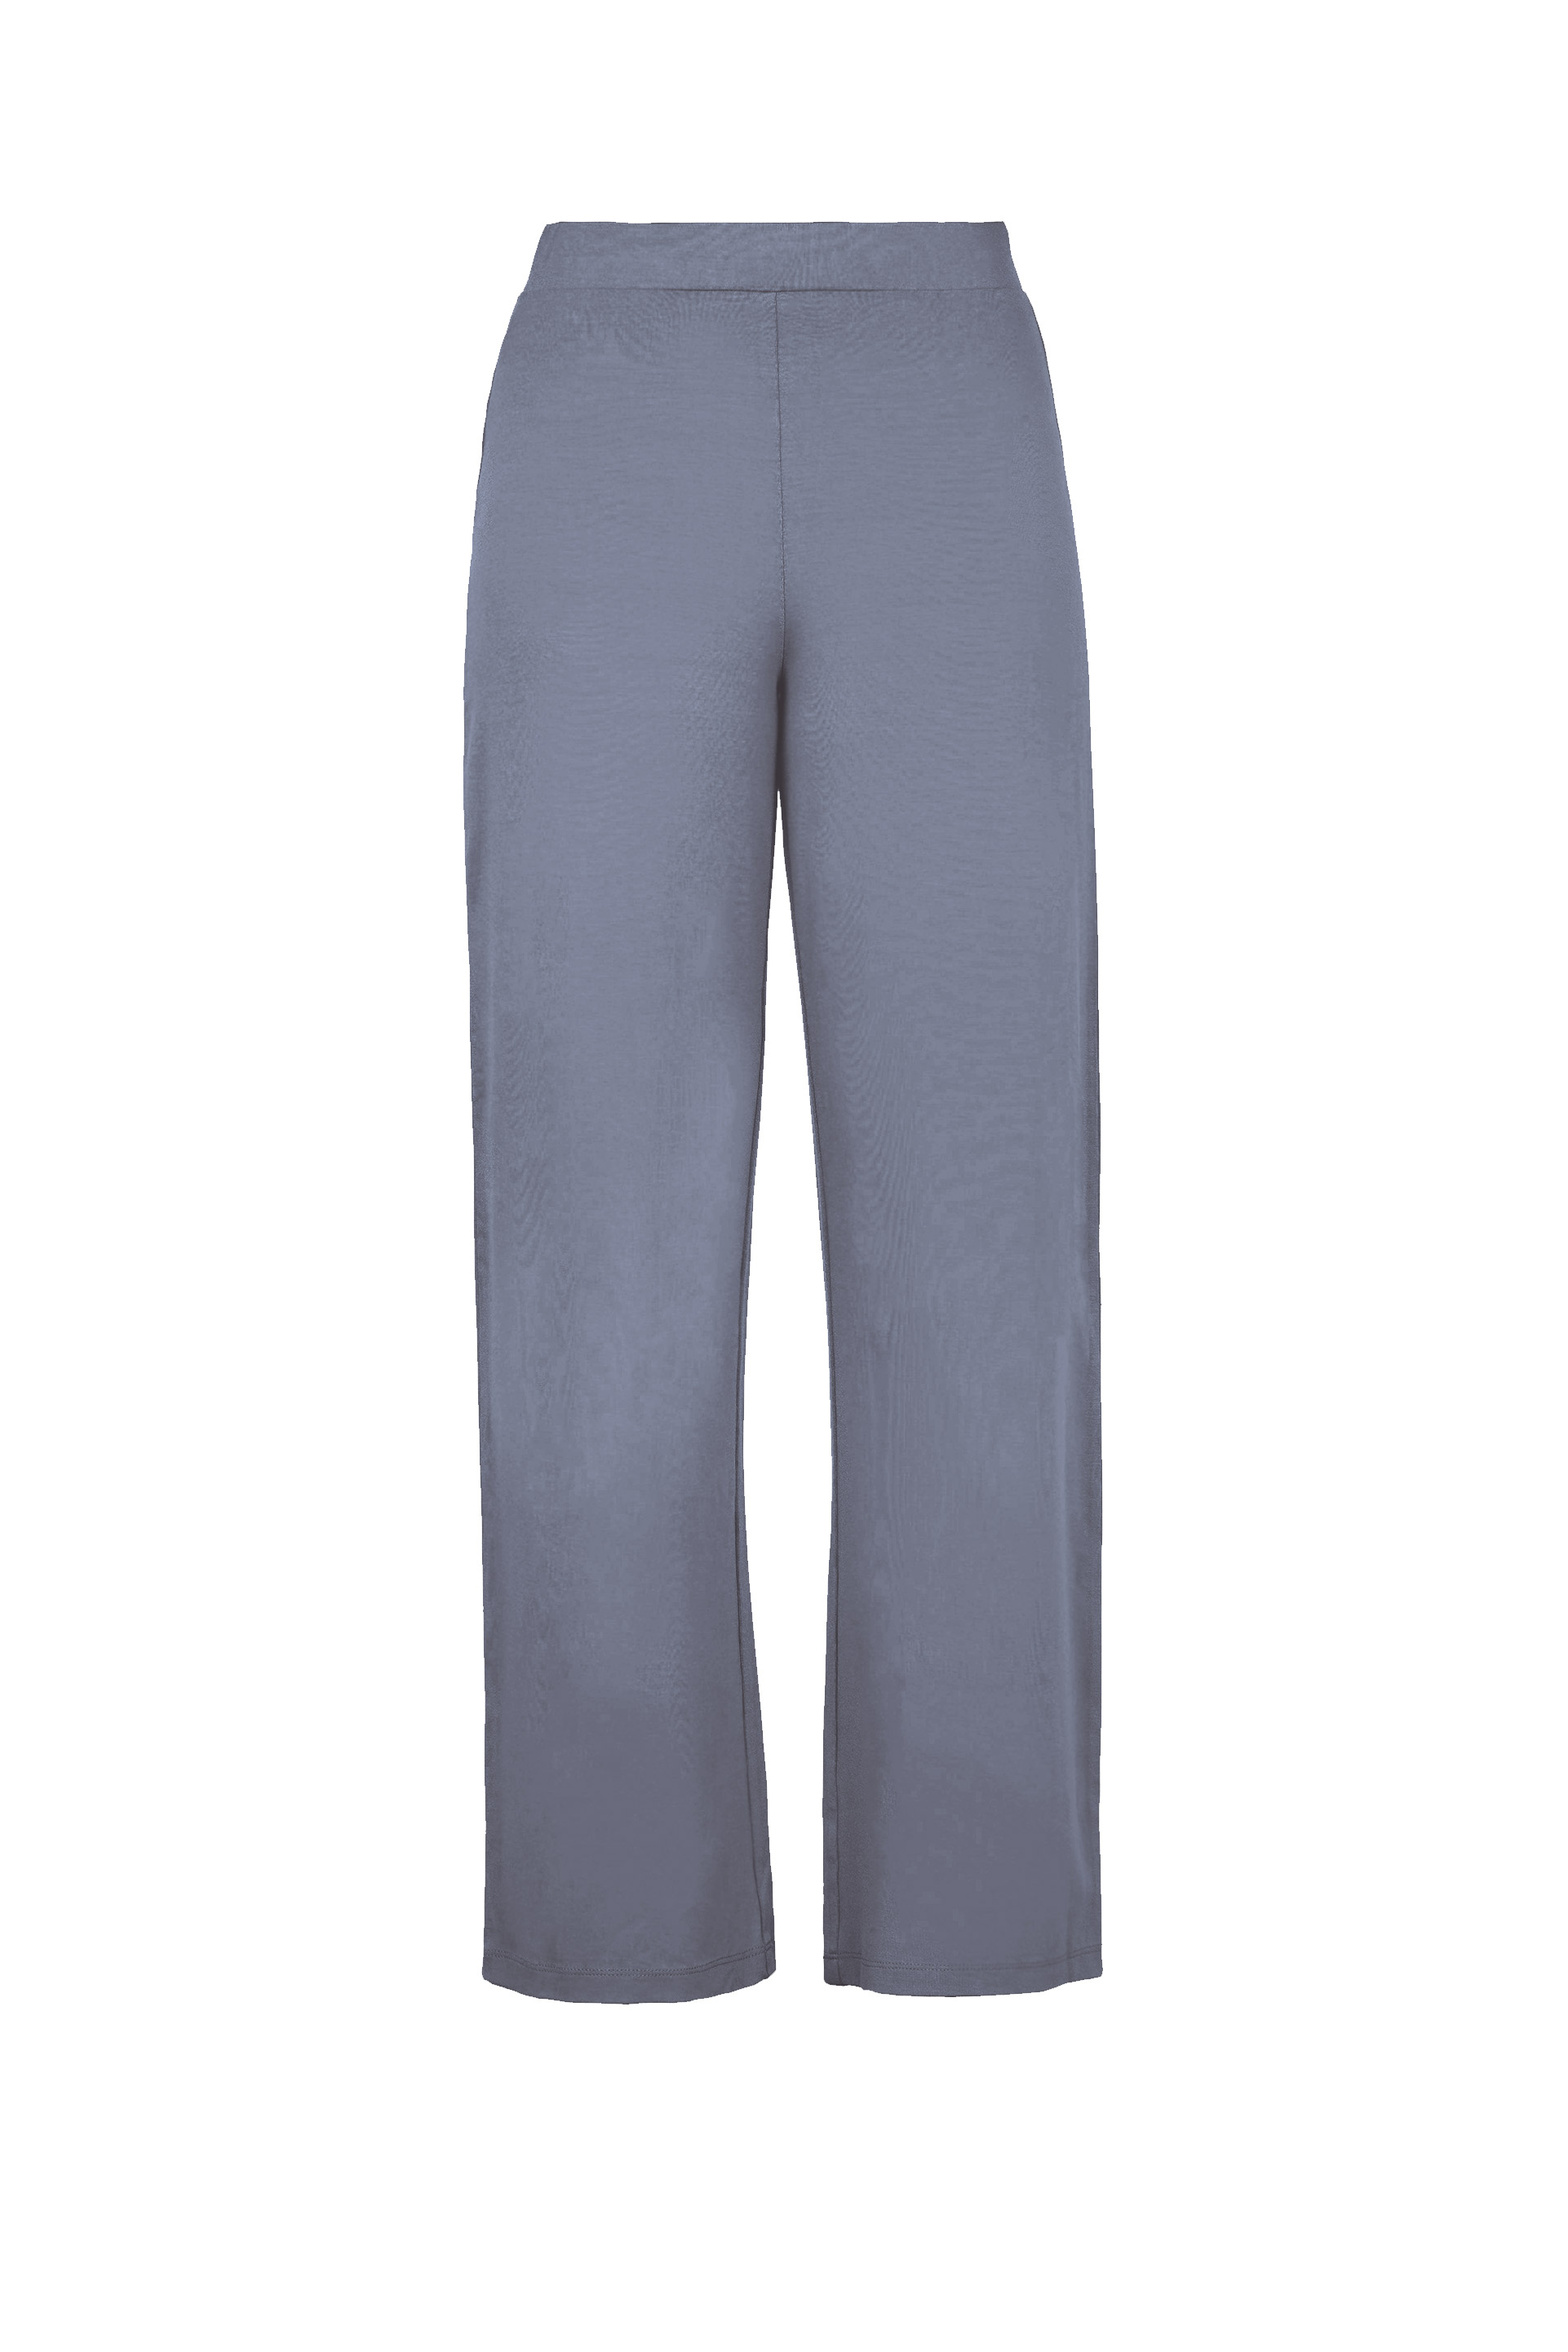 7057_lauren_jersey_trousers_french_grey_aw20.jpg